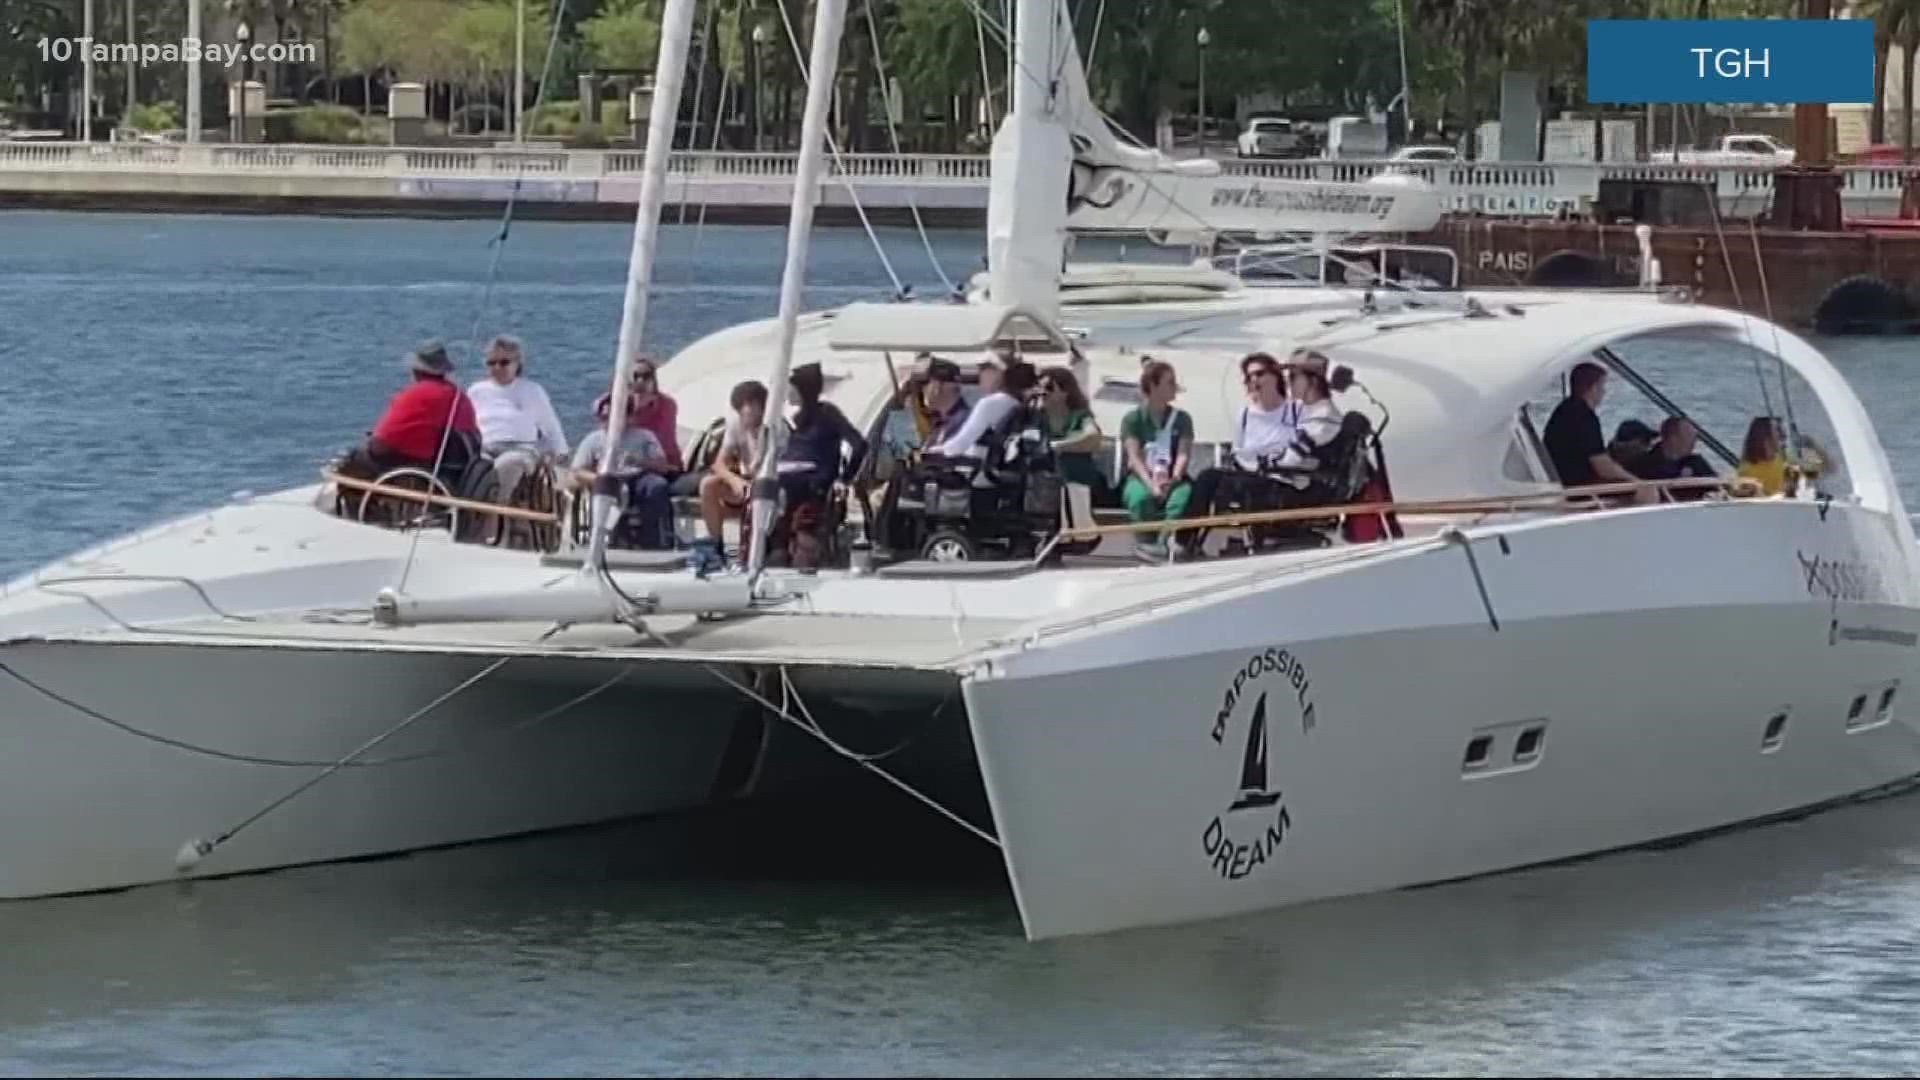 The 60-foot catamaran offers sails to people with disabilities.